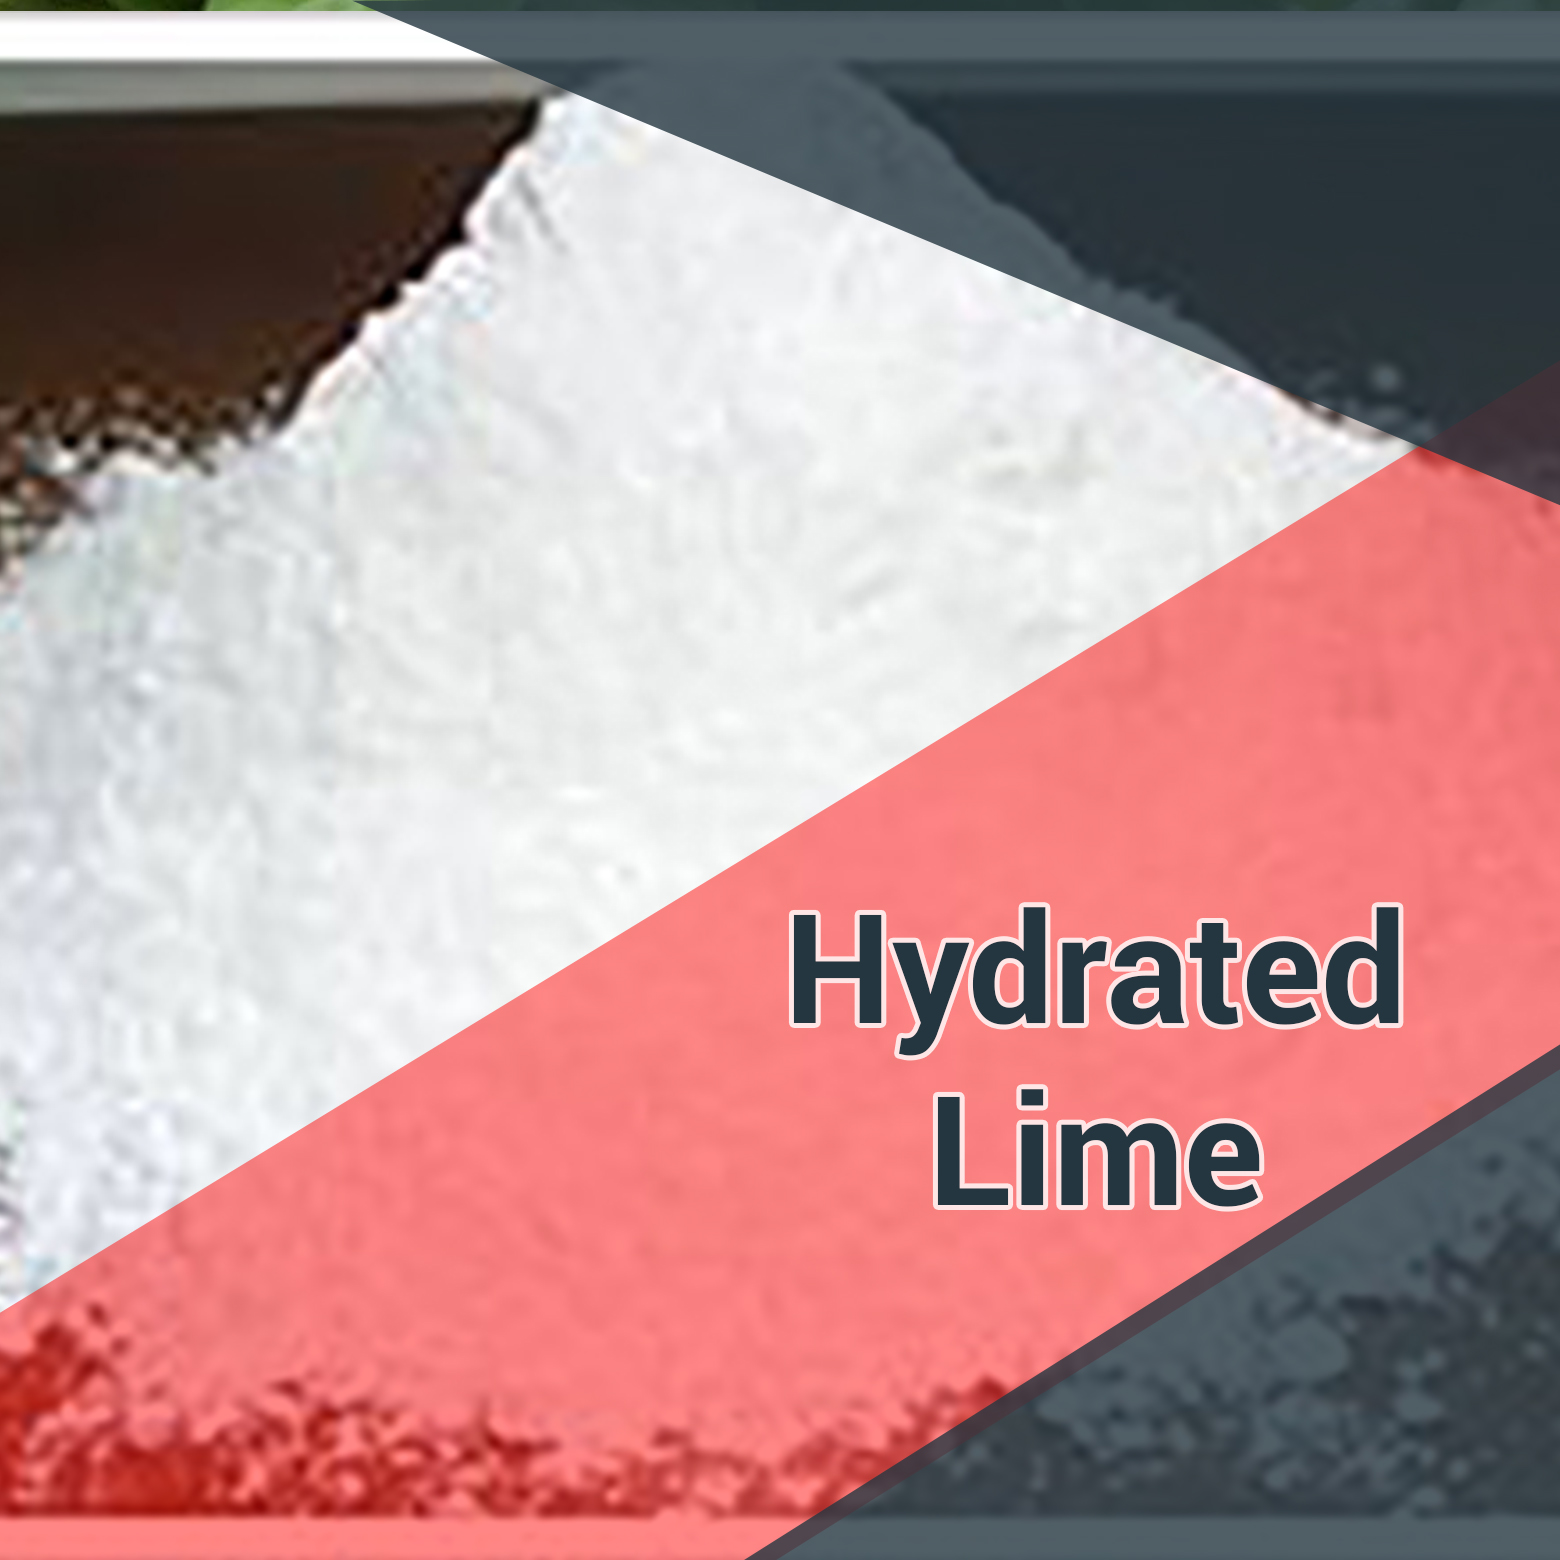 Hydrated Lime Manufacturers